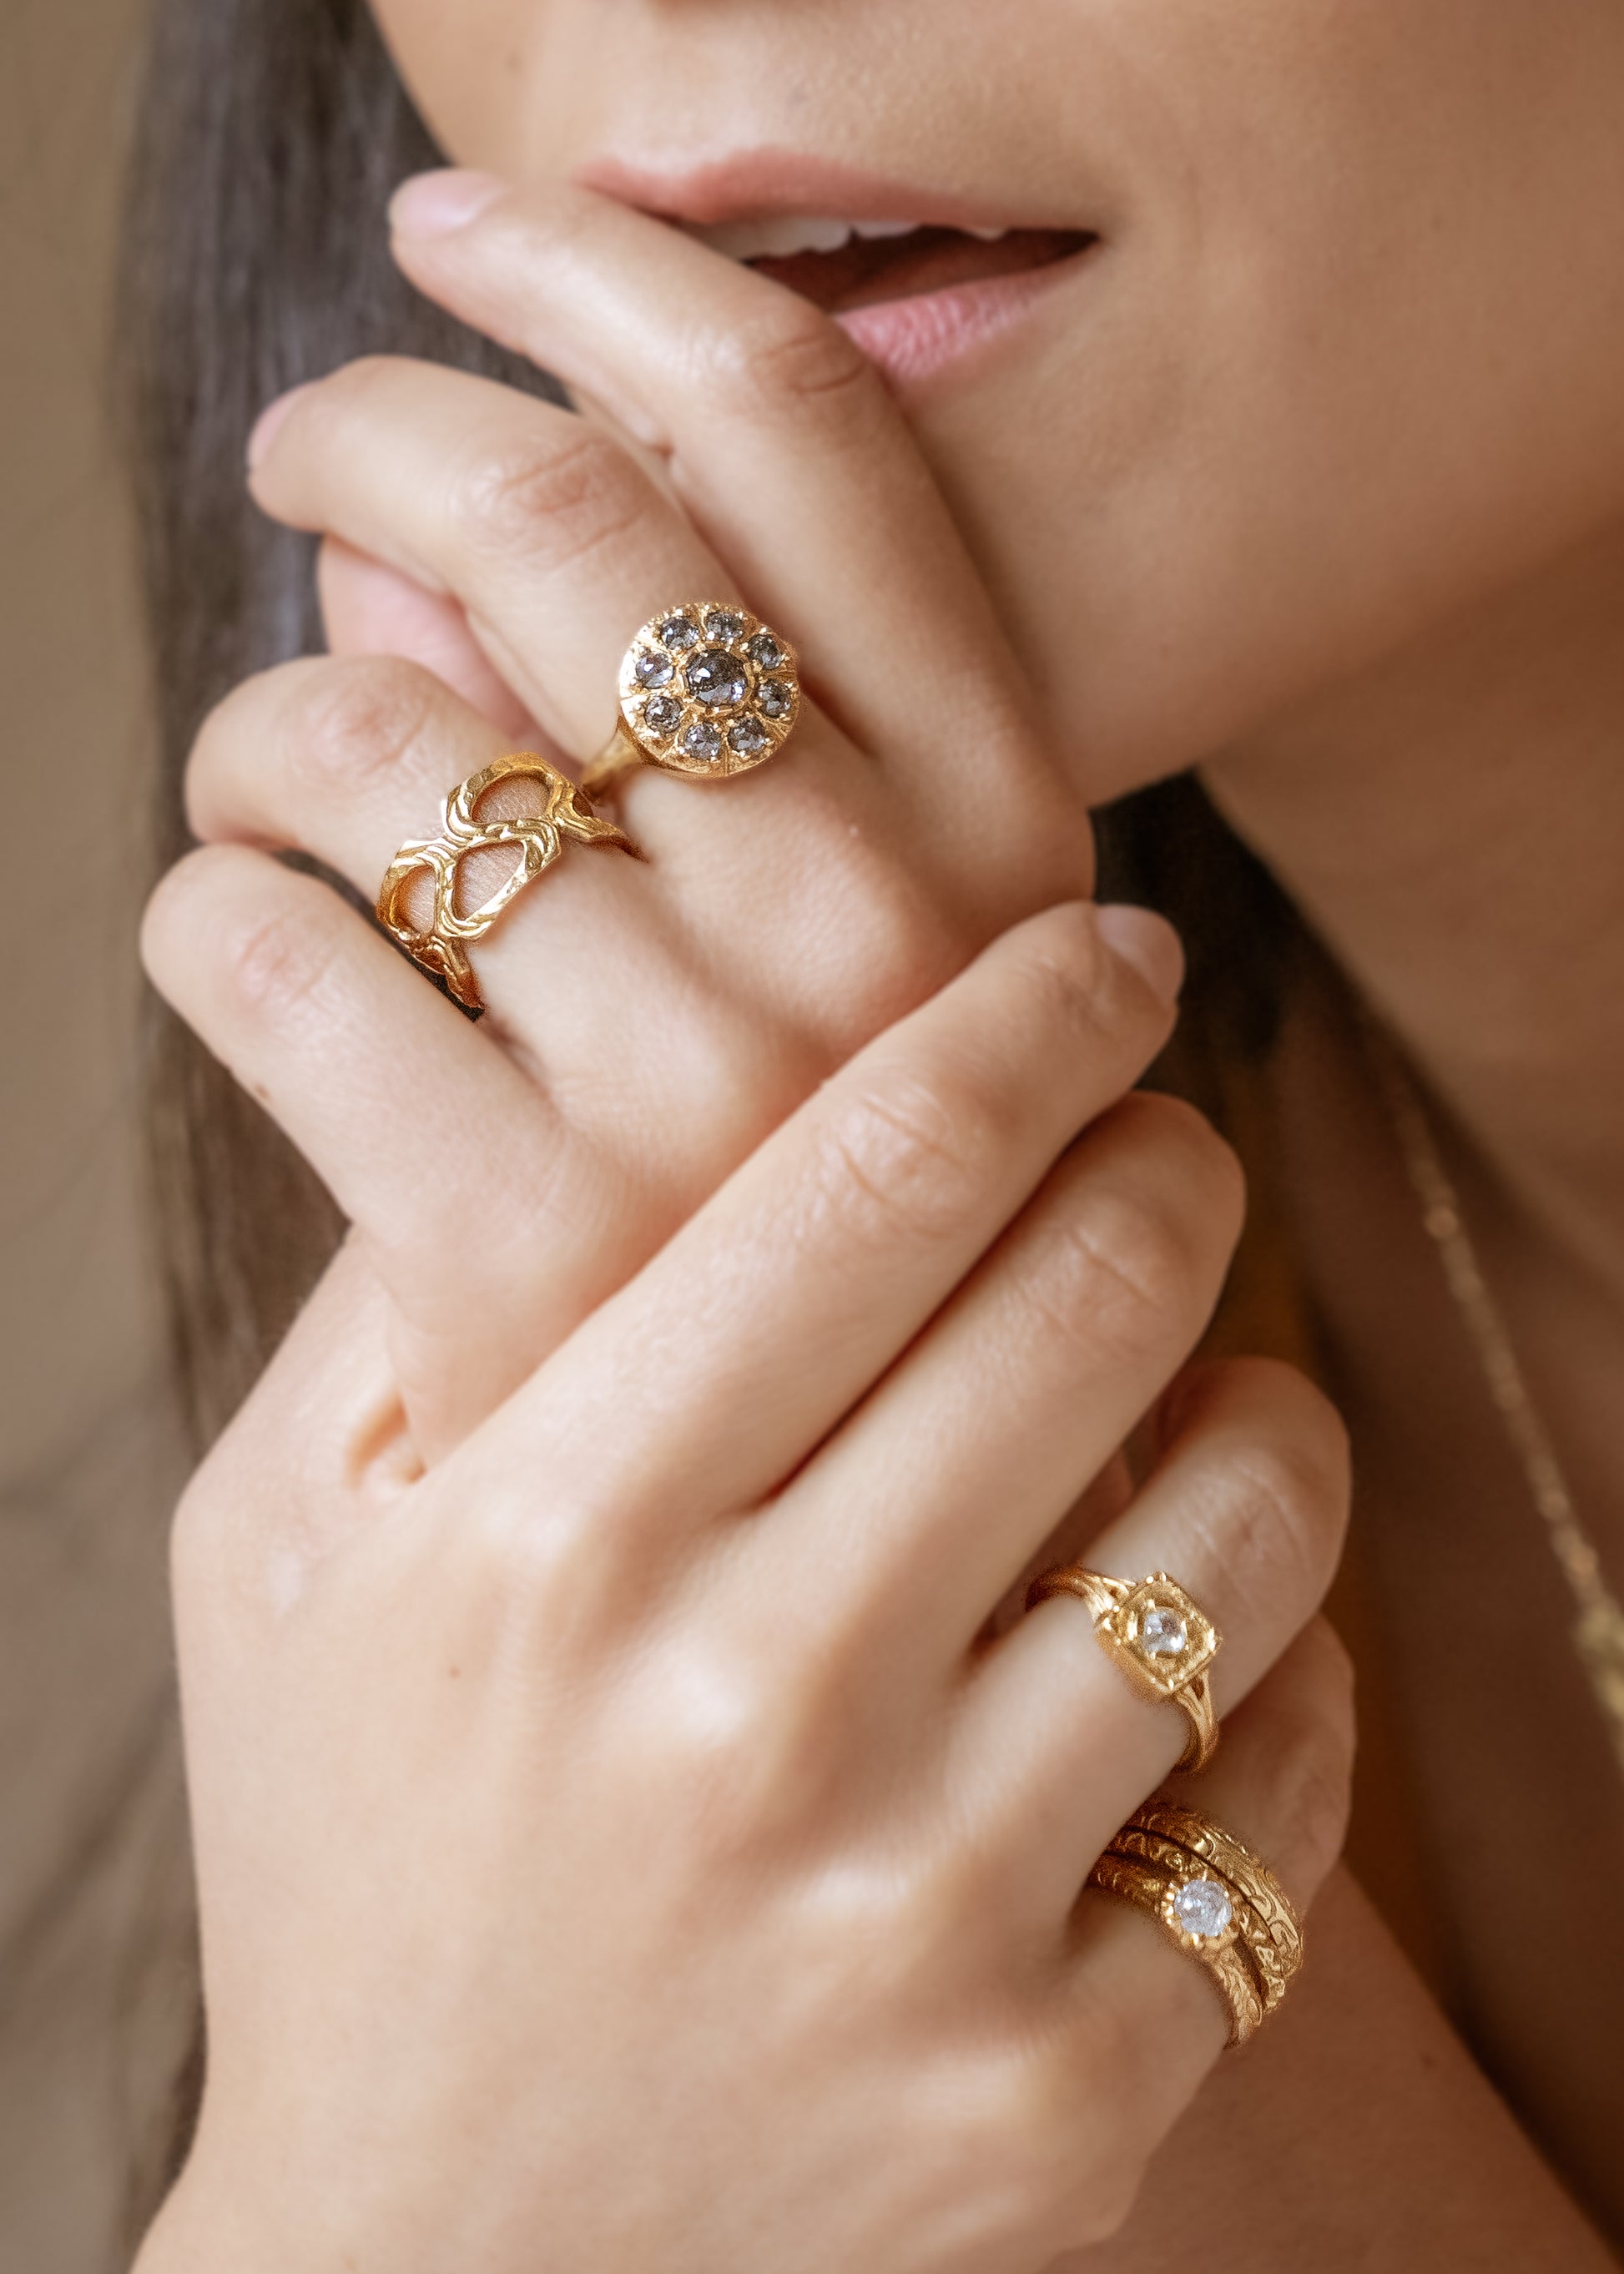 Modern lines intersect with an antique aesthetic to create the Chamber ring, a square setting of textured gold that houses a recessed rose cut diamond— strong and substantial, a meaningful connection to the past and present. 